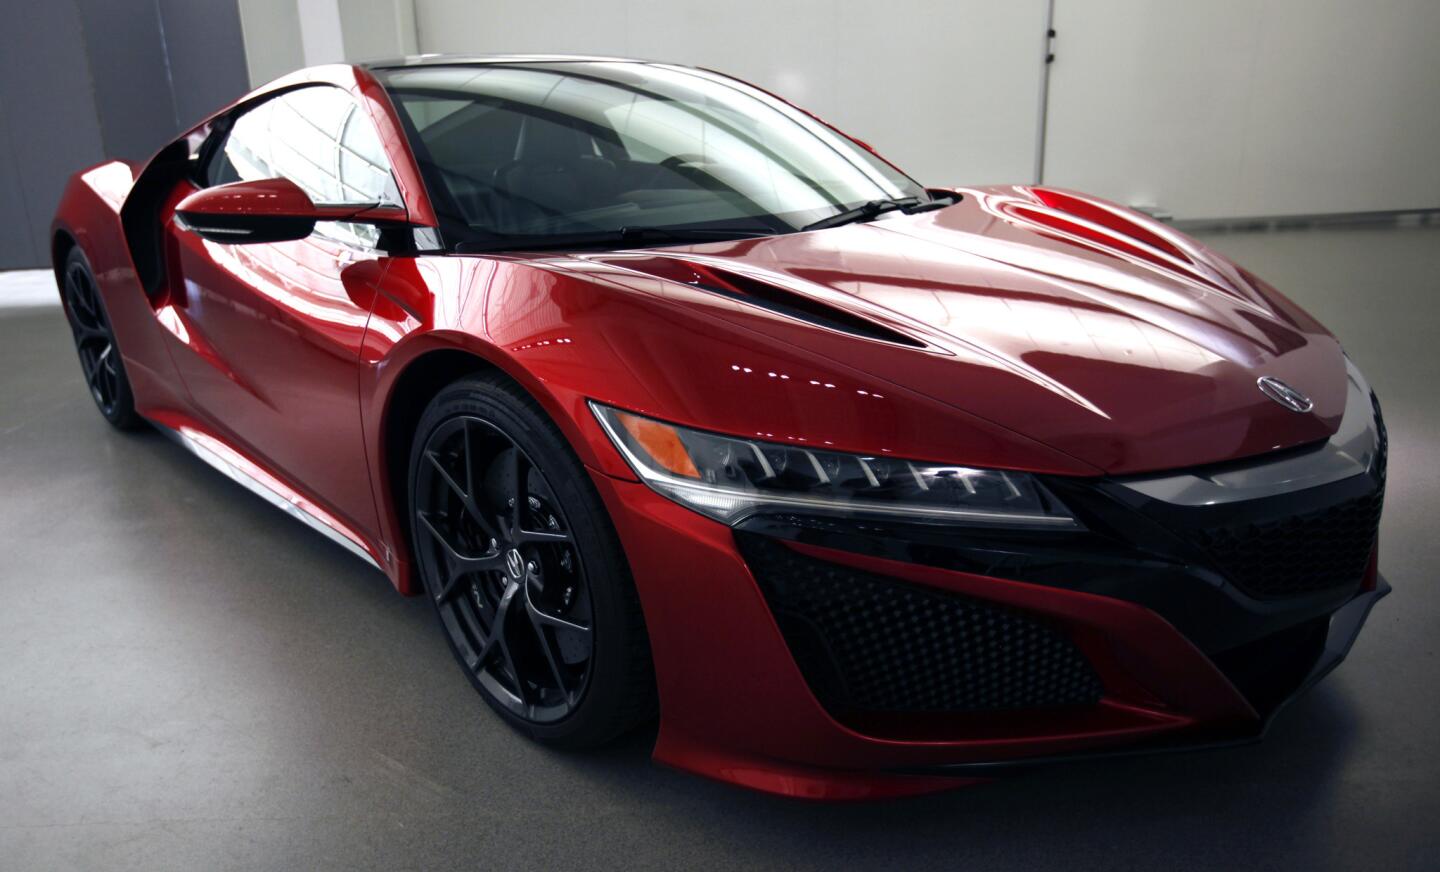 The all-new 2016 Acura NSX has a twin-turbocharged V-6 and three electric motors for a total of 550 horsepower.